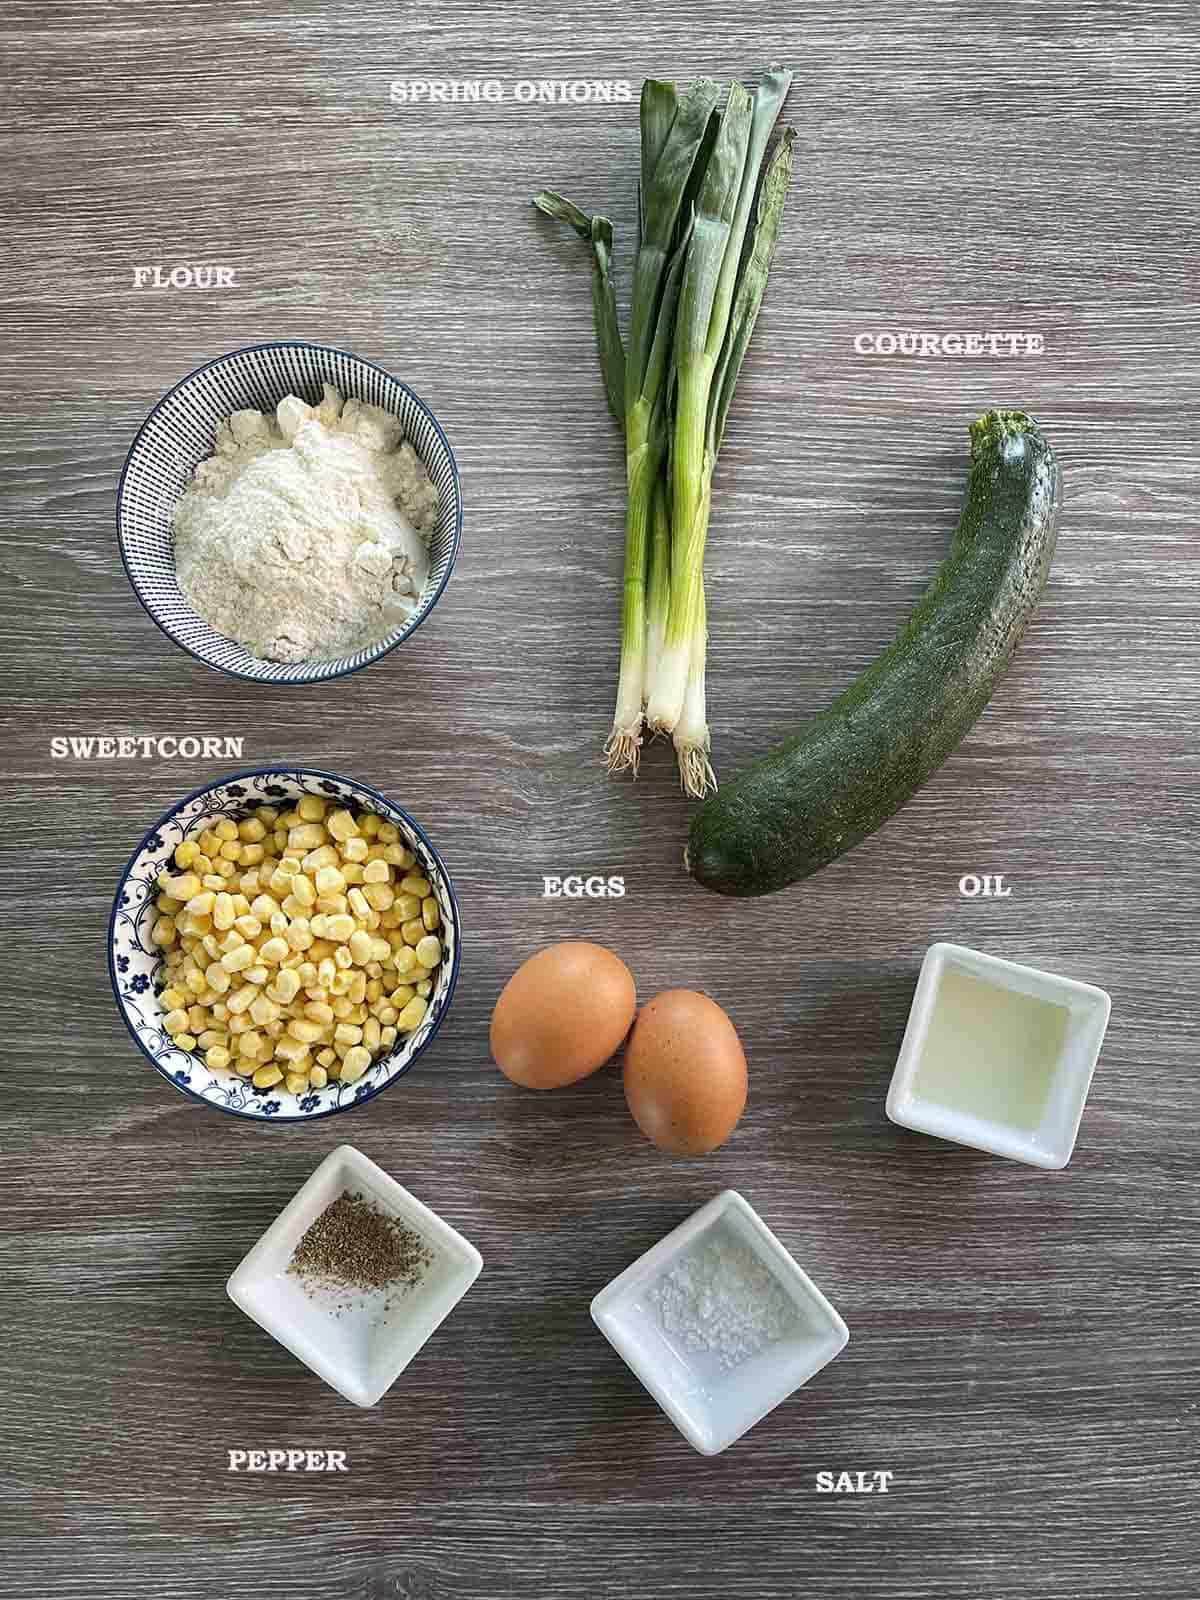 ingredients including courgettes, sweetcorn, spring onions, eggs, flour and seasoning.